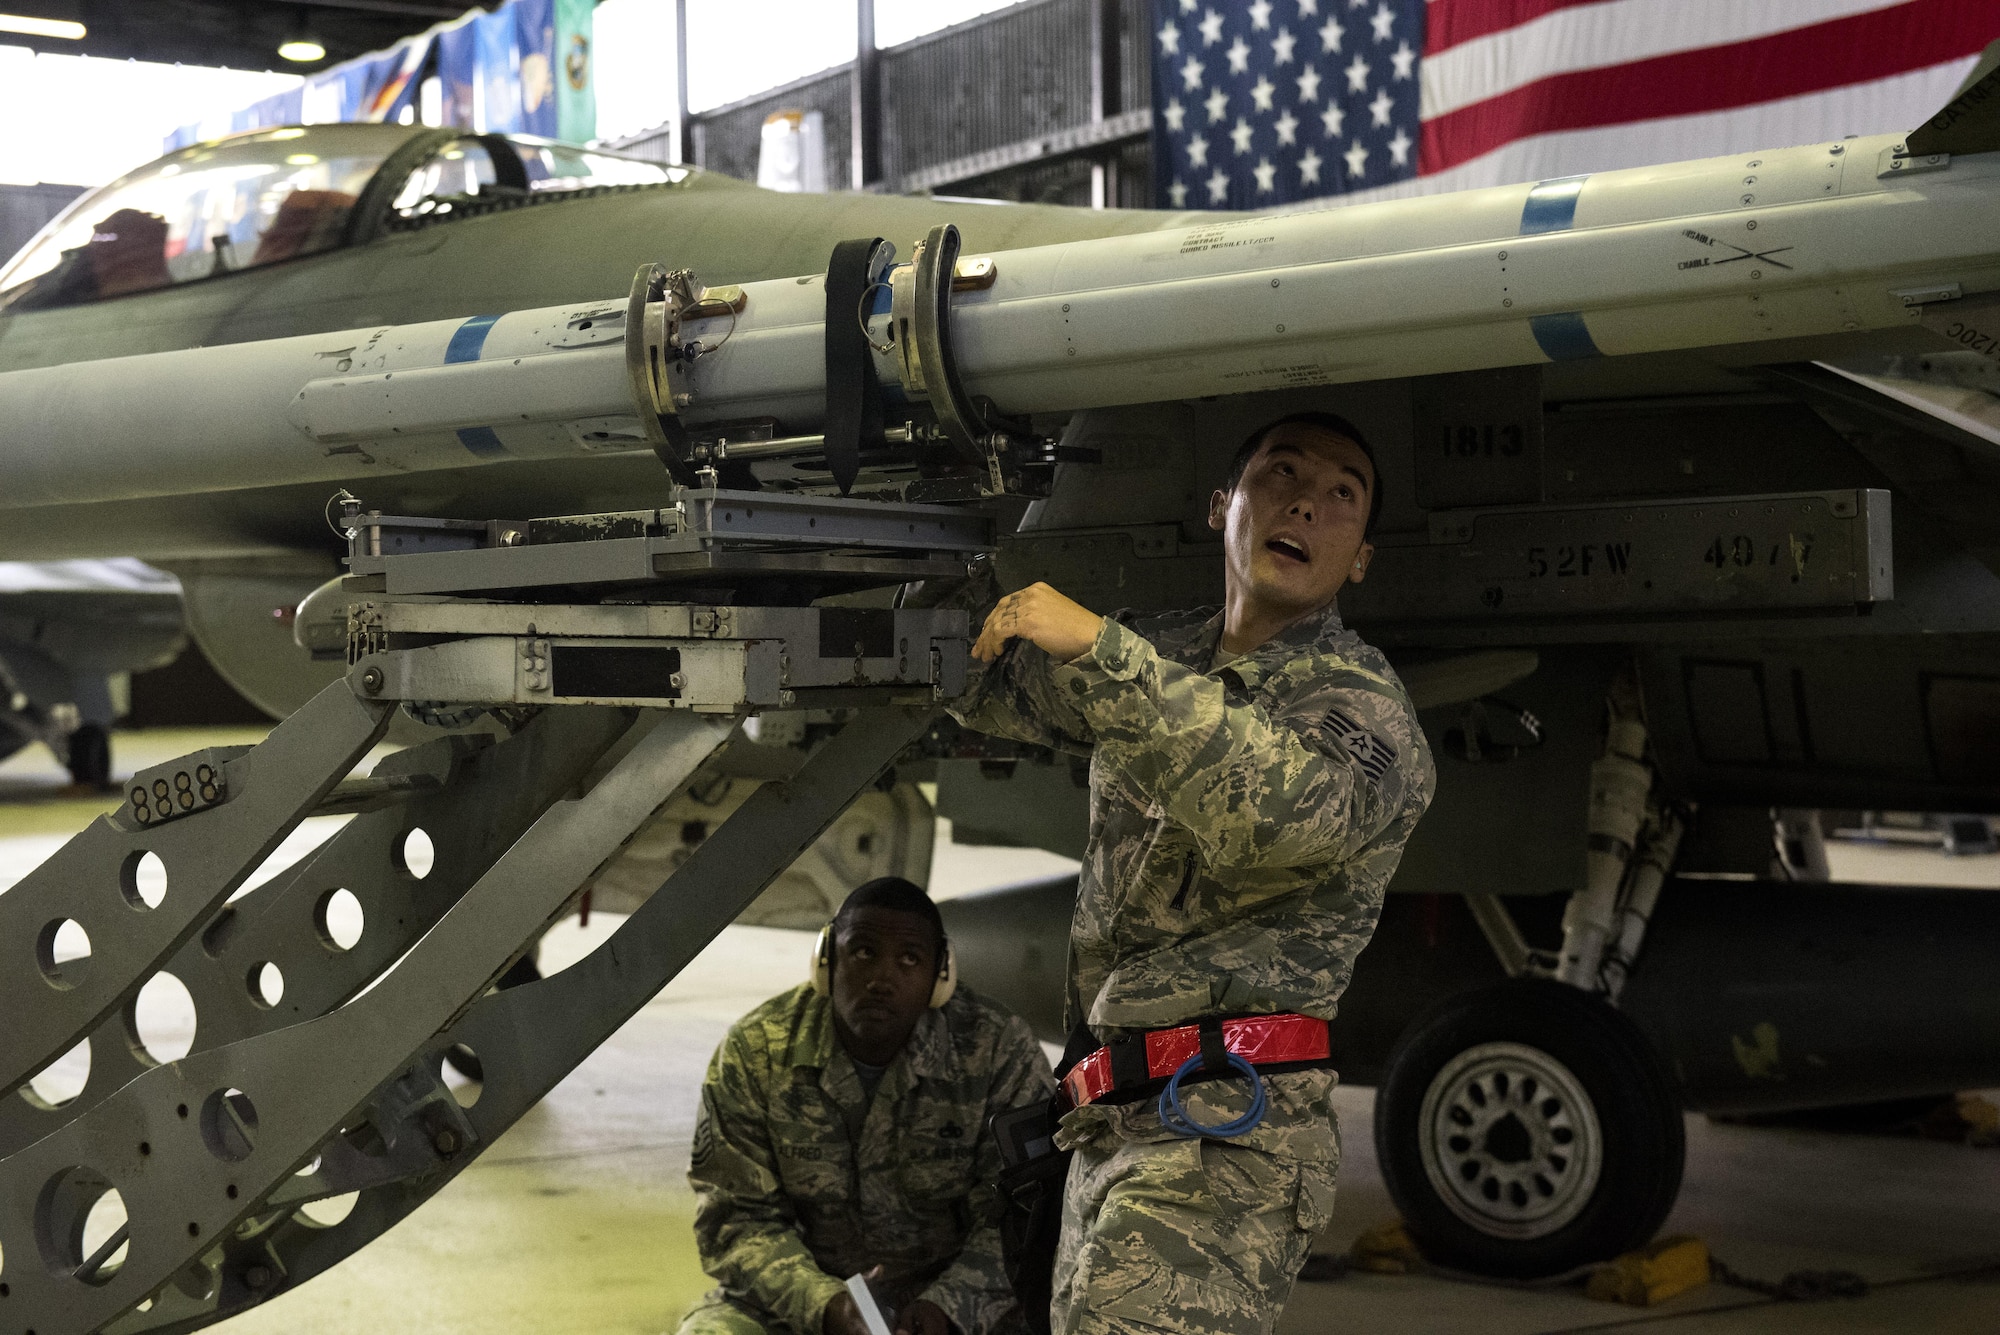 U.S. Air Force Tech. Sgt. Robert Morley, right, 52nd Aircraft Maintenance Squadron weapons load crew chief, loads an inert weapon on an F-16 Fighting Falcon during the quarterly weapons load competition in Hangar One at Spangdahlem Air Base, Germany, Nov. 10, 2016. The competition consisted of two teams competing against each other to load weapons quickly and accurately. (U.S. Air Force photo by Airman 1st Class Preston Cherry)